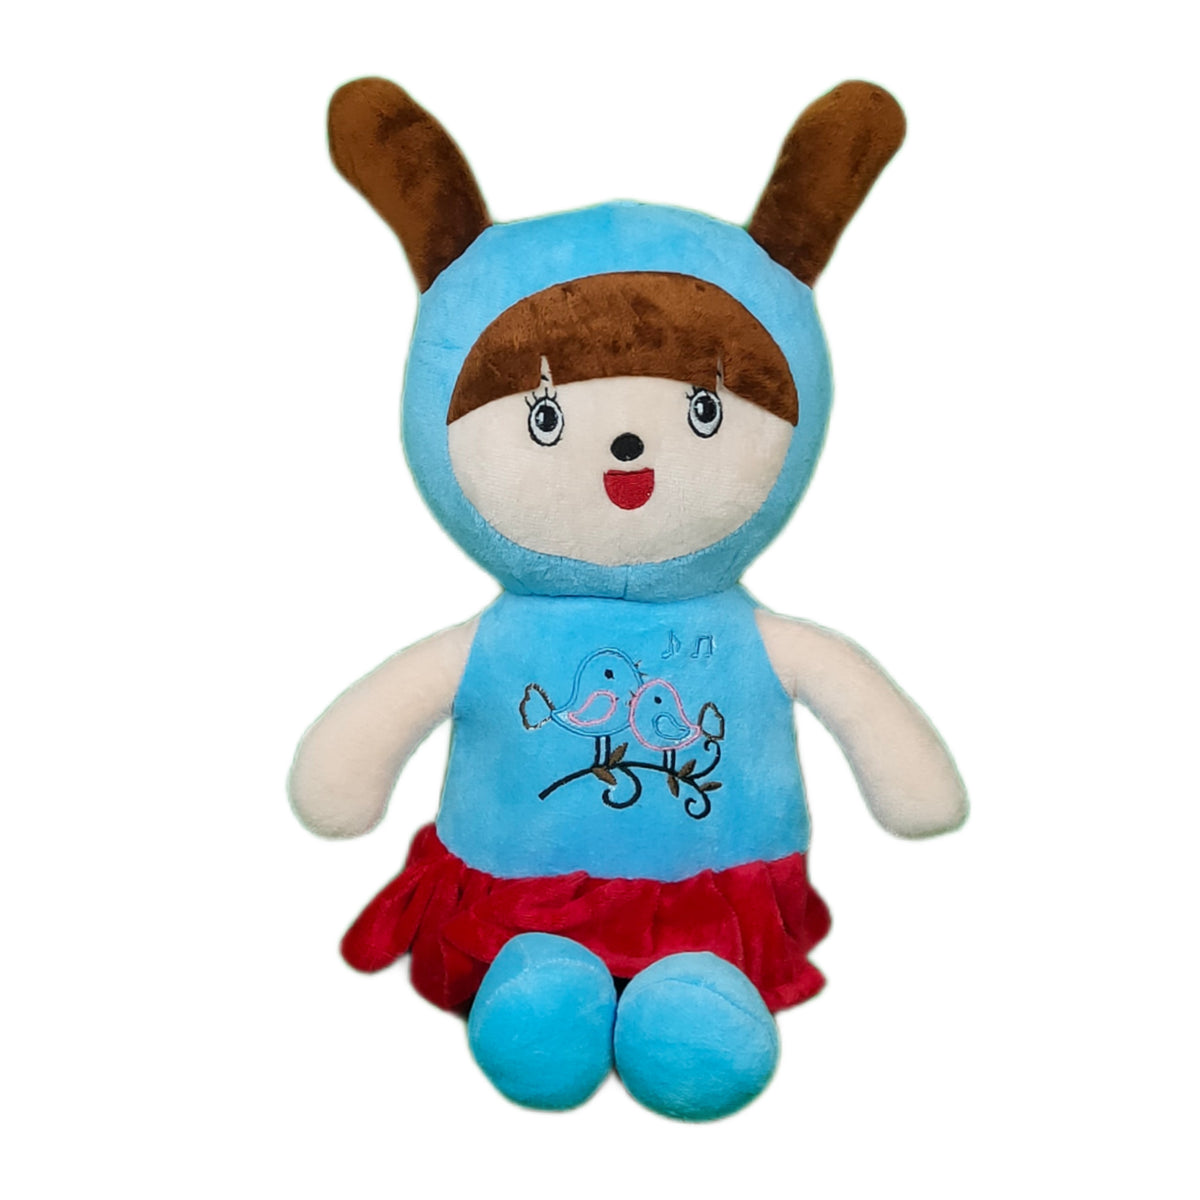 Play Hour Coco Rag Doll Plush Soft Toy Wearing Sky Frock for Ages 3 Years and Up, 45cm